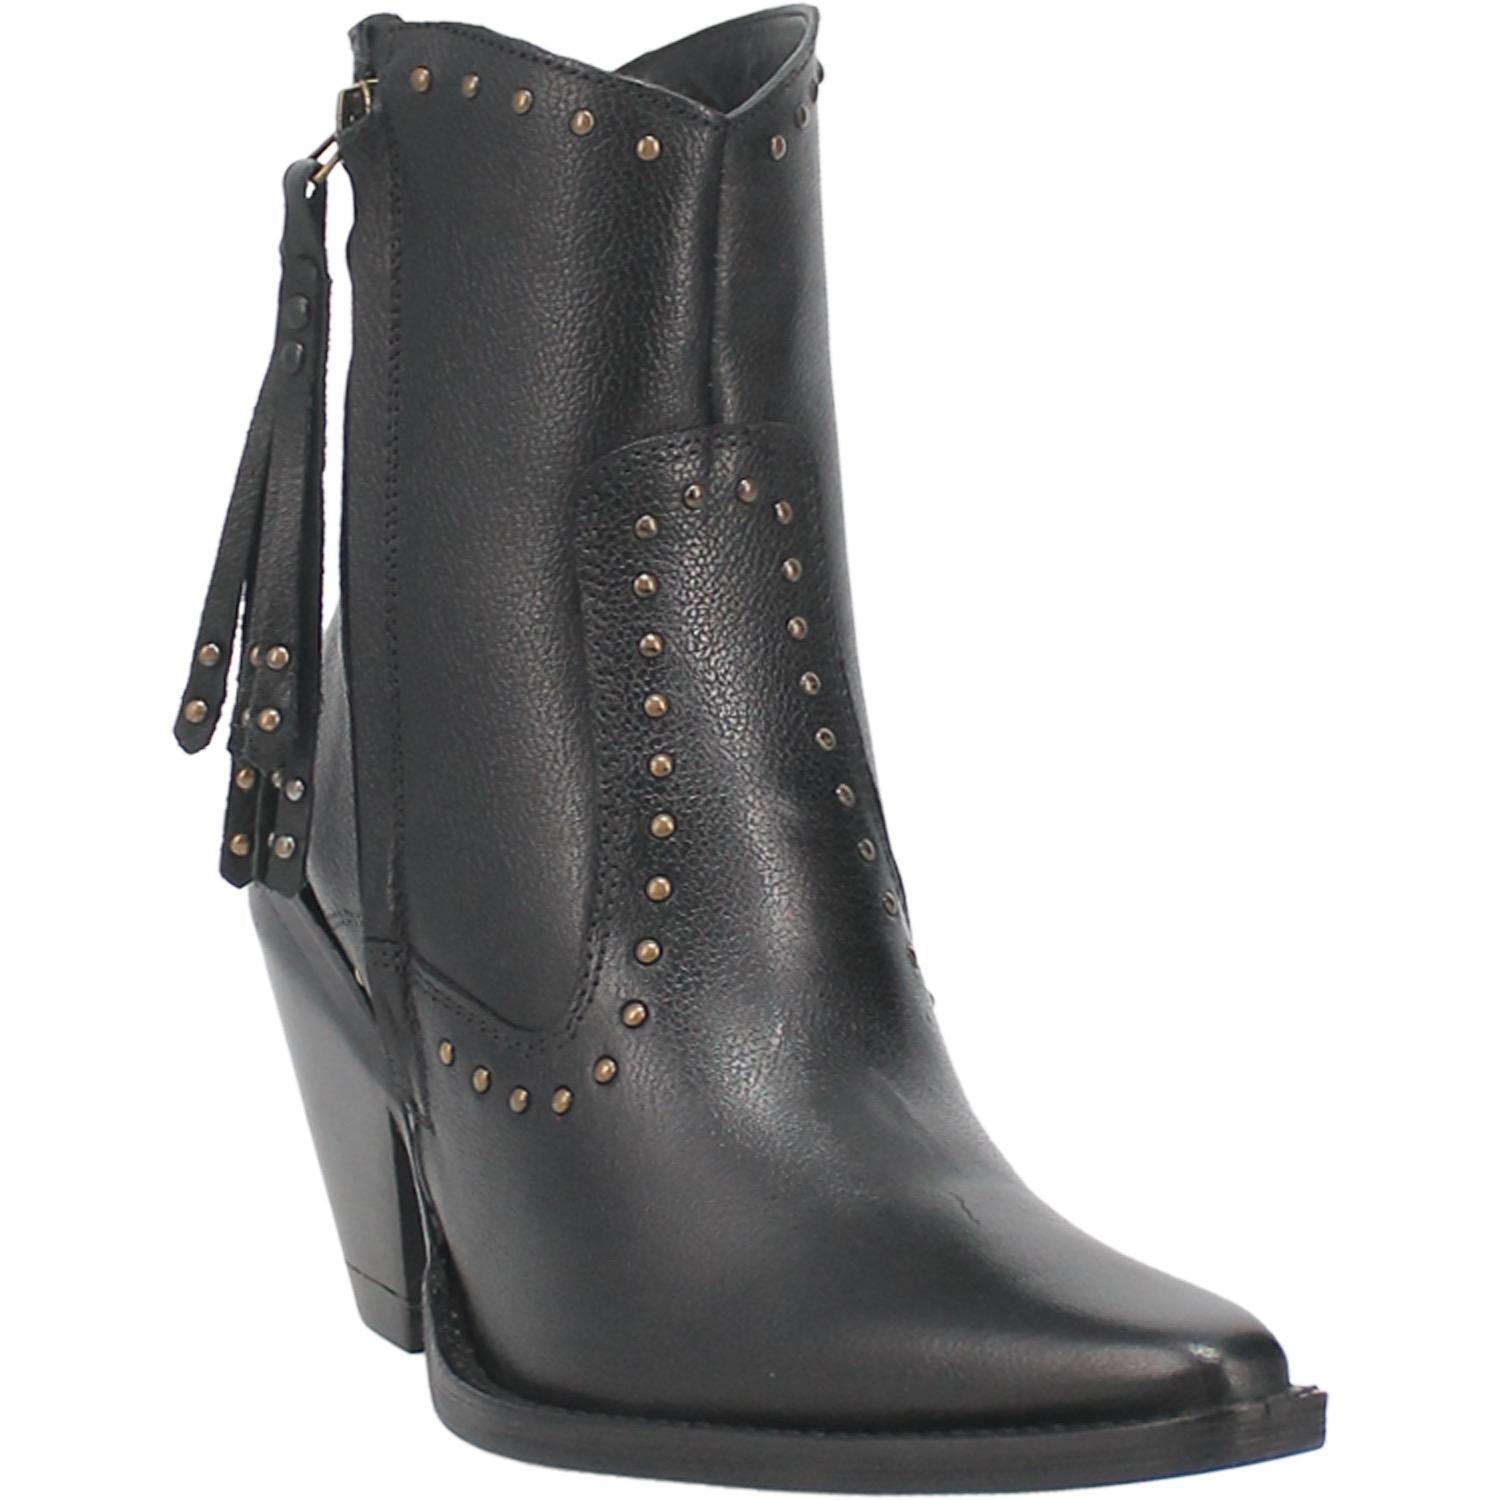 The boots shown are a low calf height bootie with a snip pointed toe made of genuine leather. The stud design and detail adds an additional edge to any outfit you pair them with. This pair is black leather.